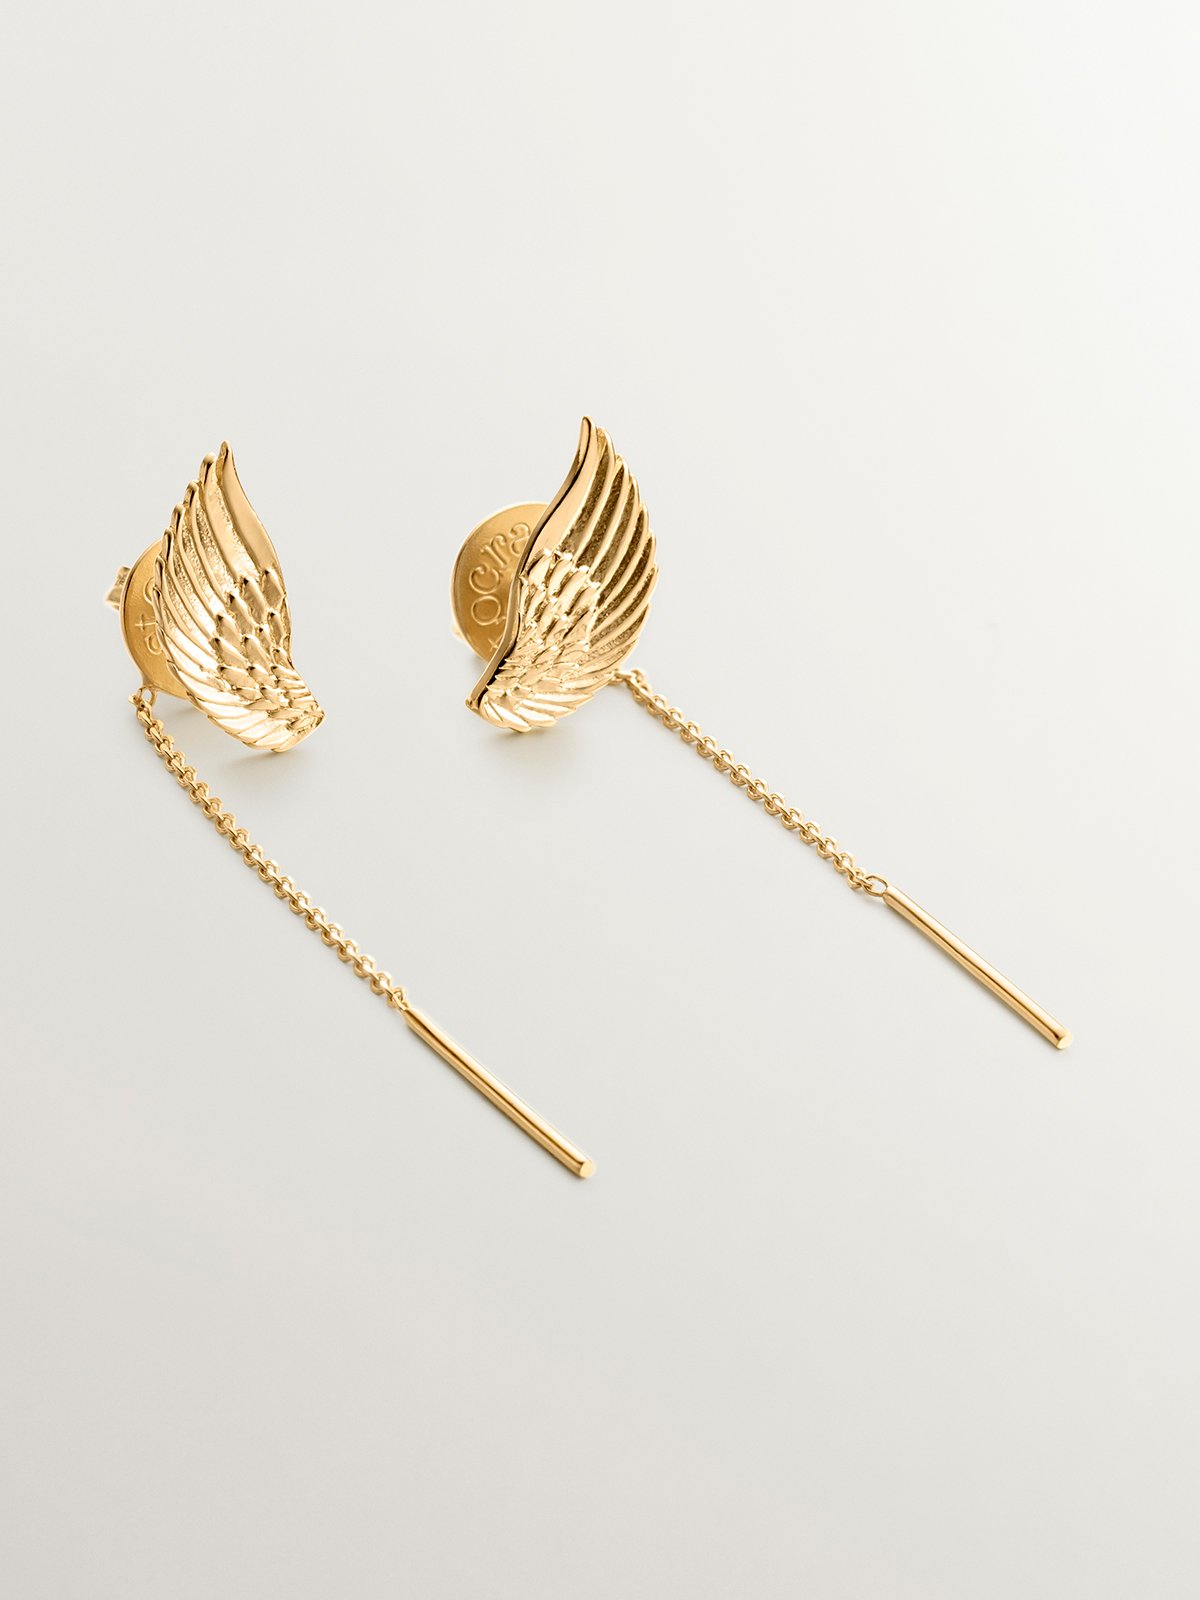 Long 925 silver earrings bathed in 18K yellow gold with wings